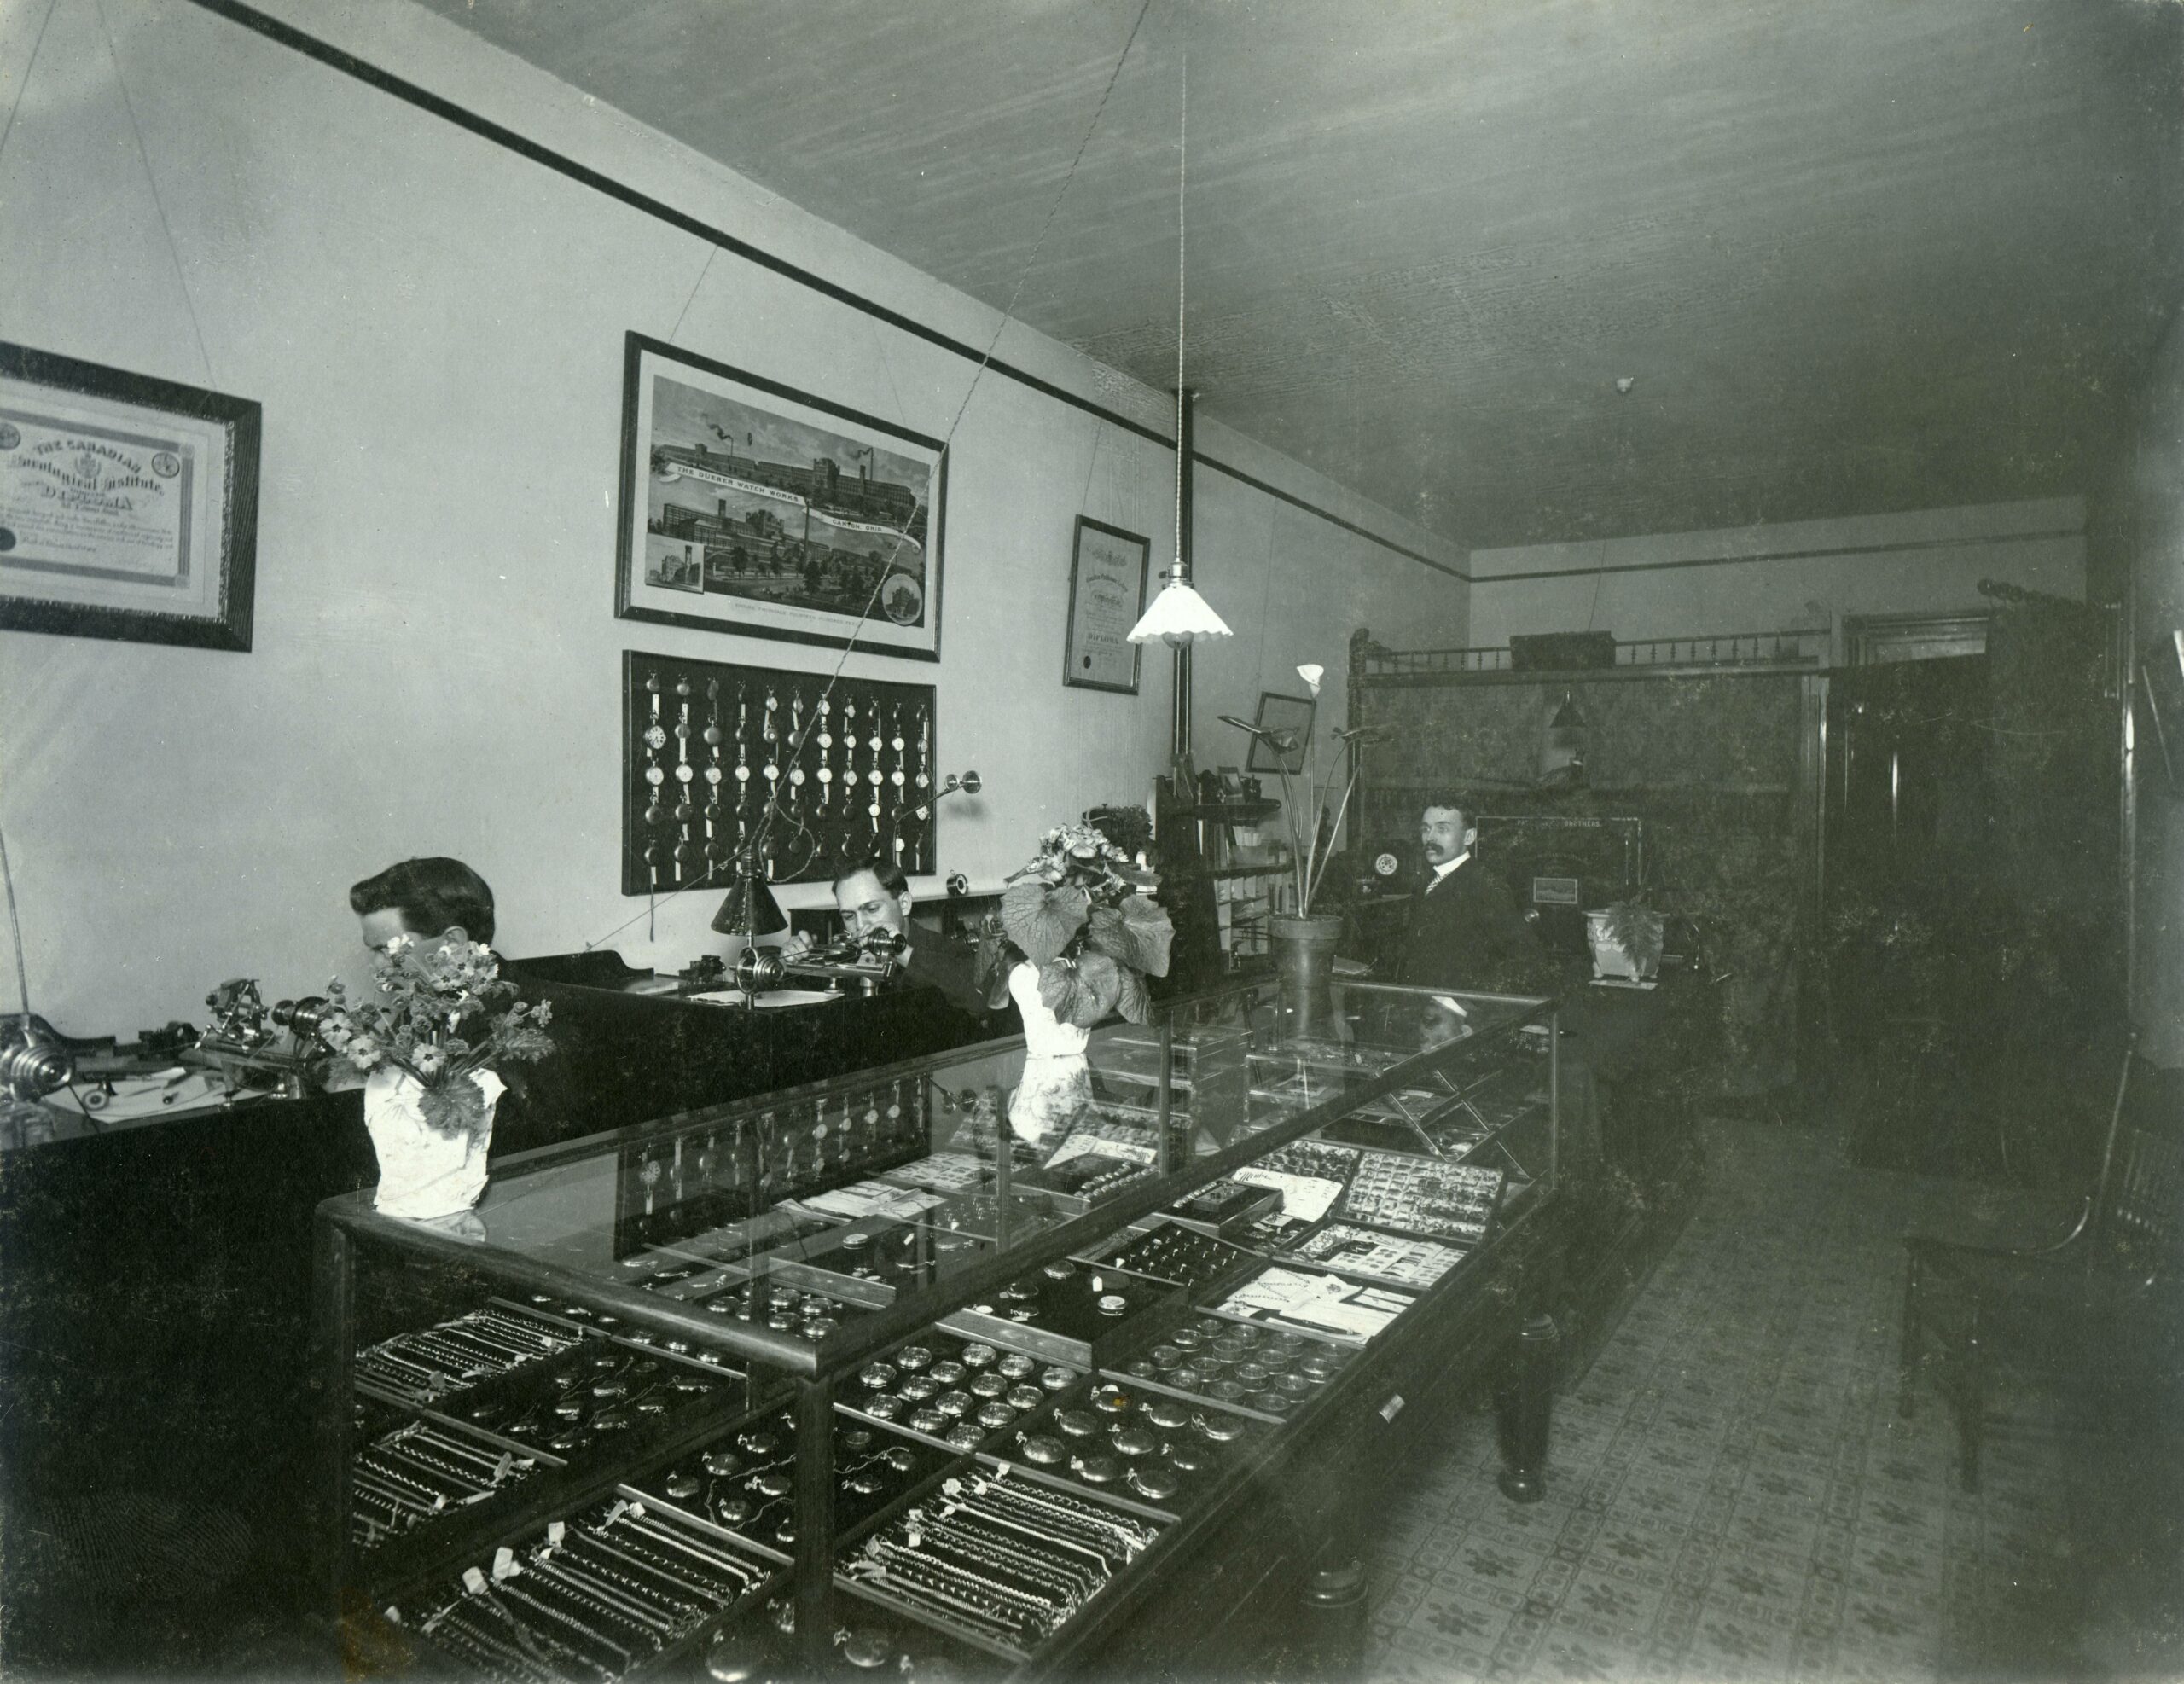 Inside lowly lit early 1900s shop with c a glass case on the left filled with jewelry